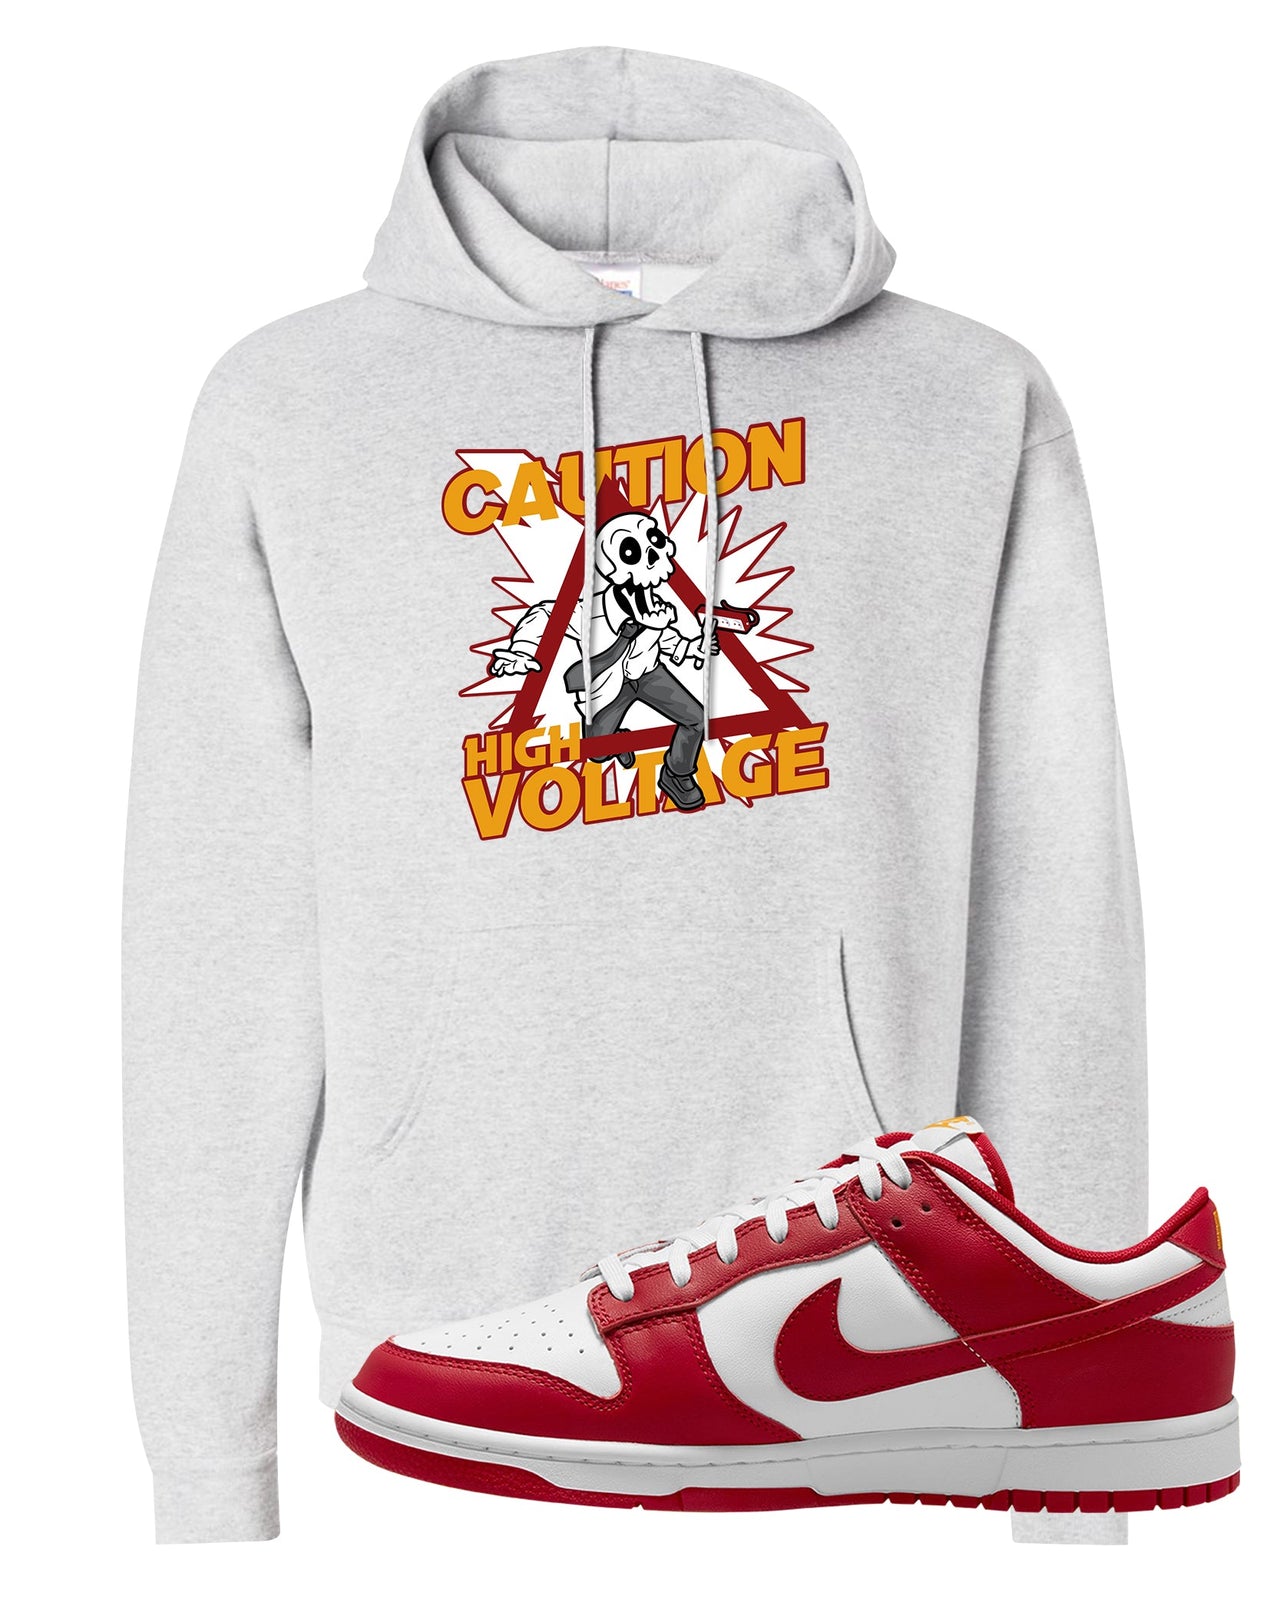 Red White Yellow Low Dunks Hoodie | Caution High Voltage, Ash